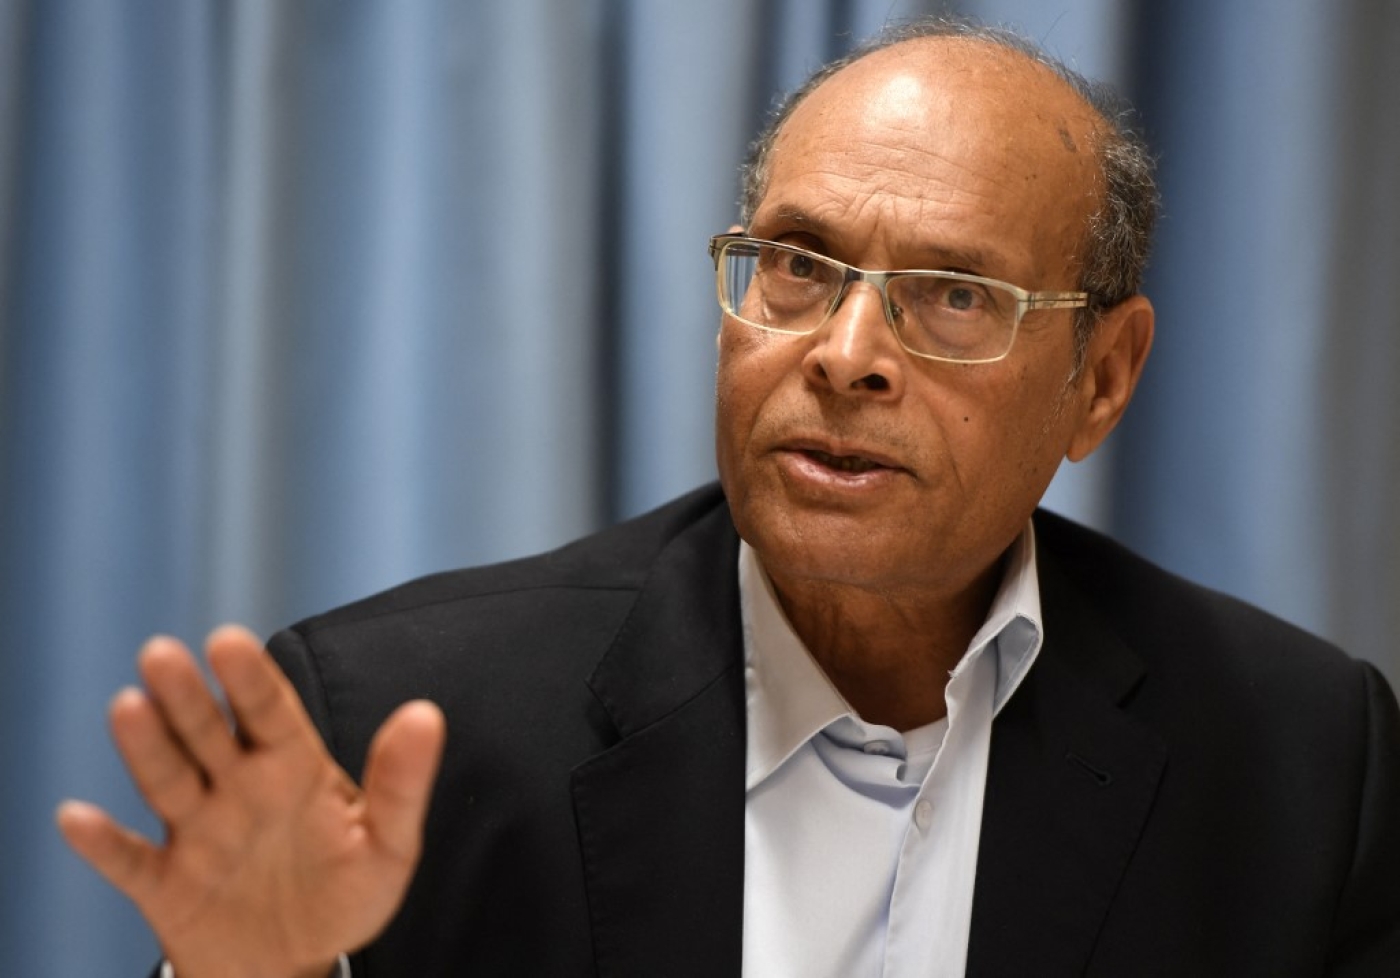 Moncef Marzouki speaks during a joint press at the UN headquarters in Geneva on 2 March 2017. (AFP)